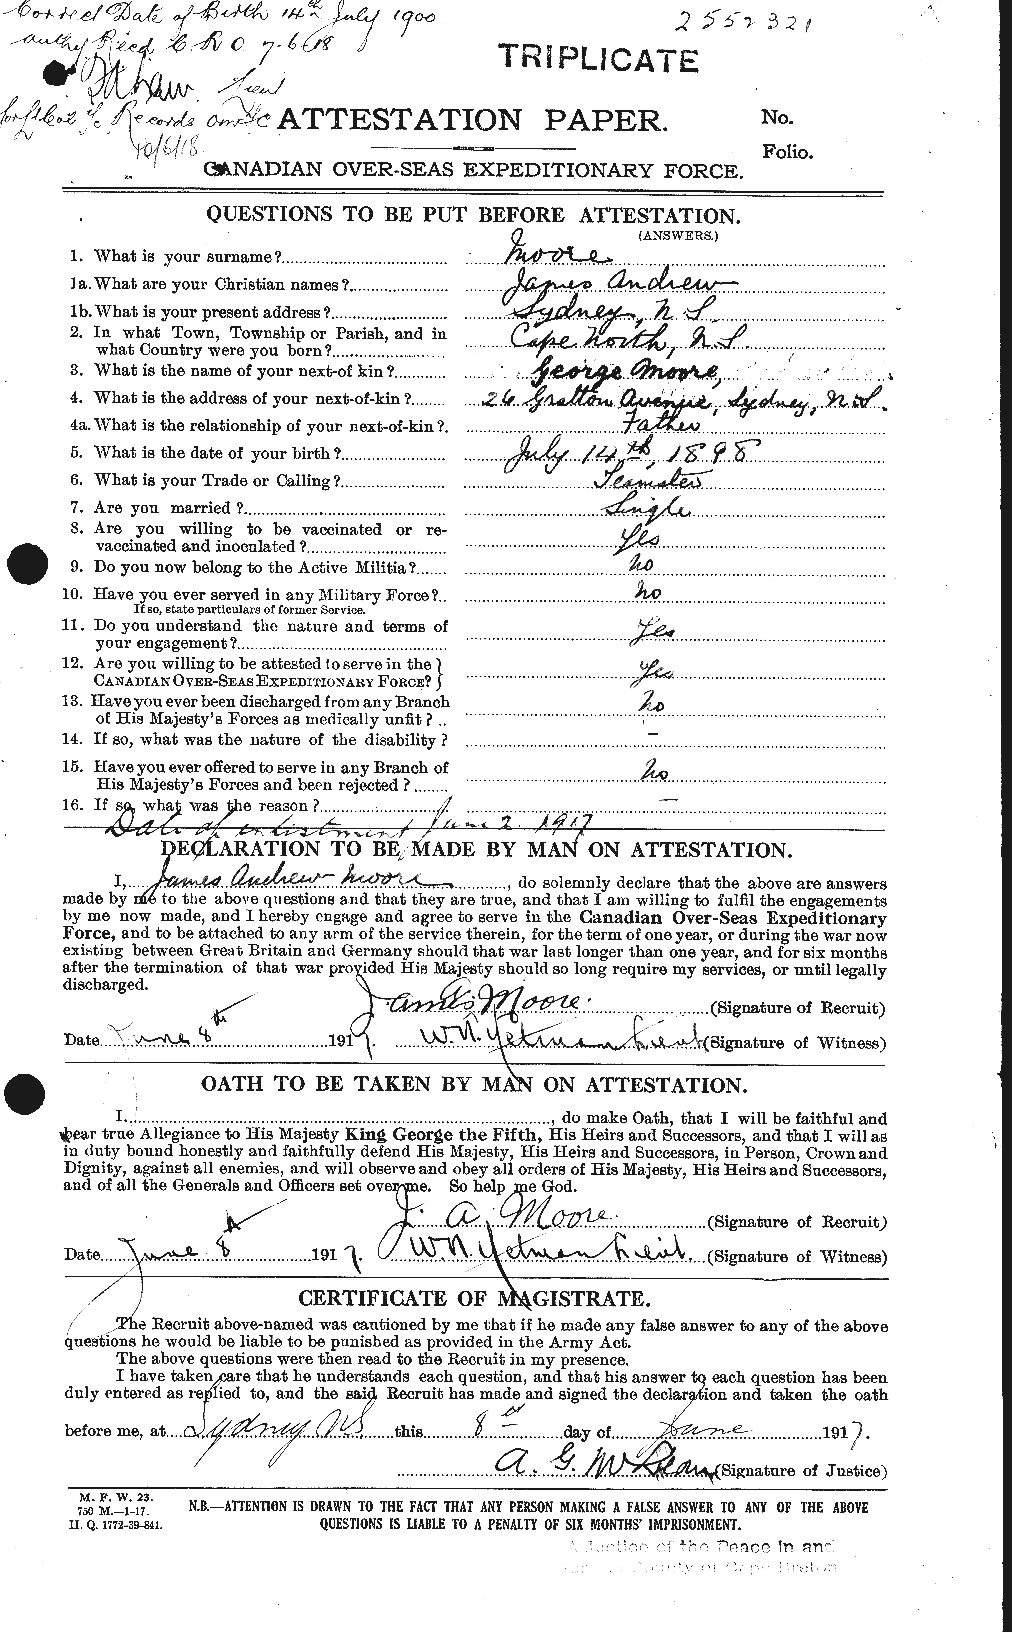 Personnel Records of the First World War - CEF 502205a